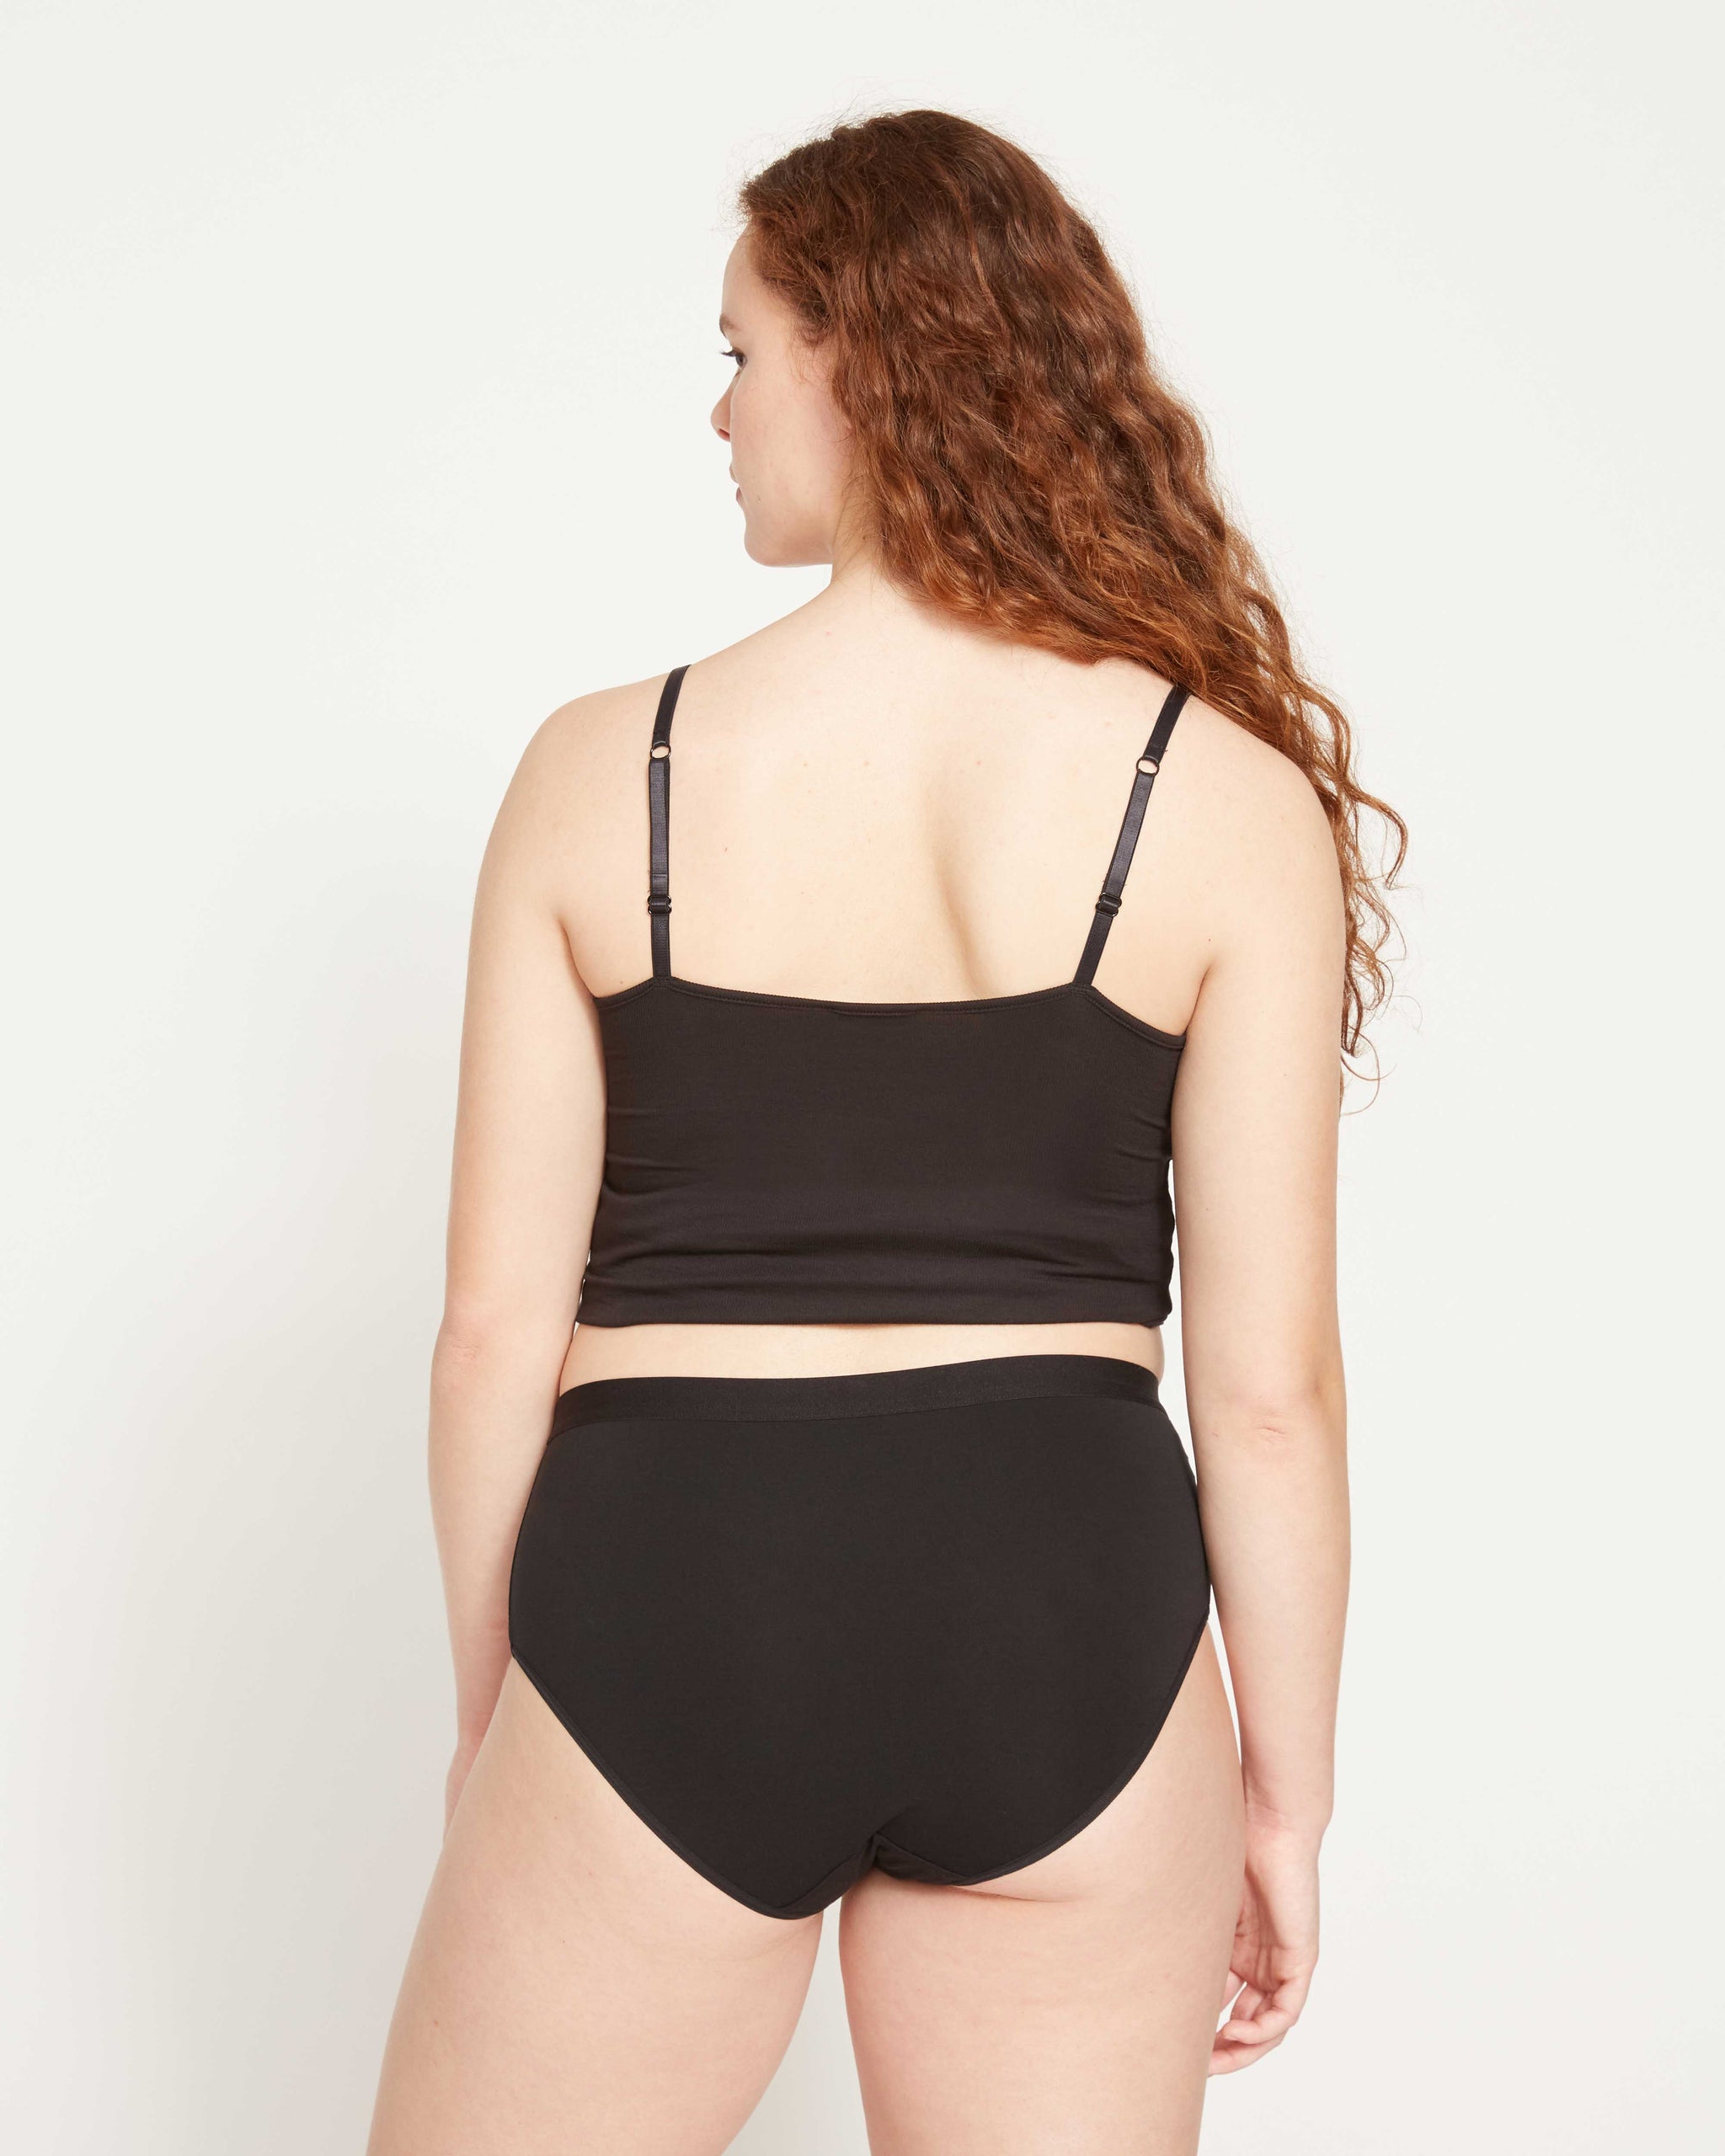 Plus Size Underwear - Review of Universal Standard UltimateS